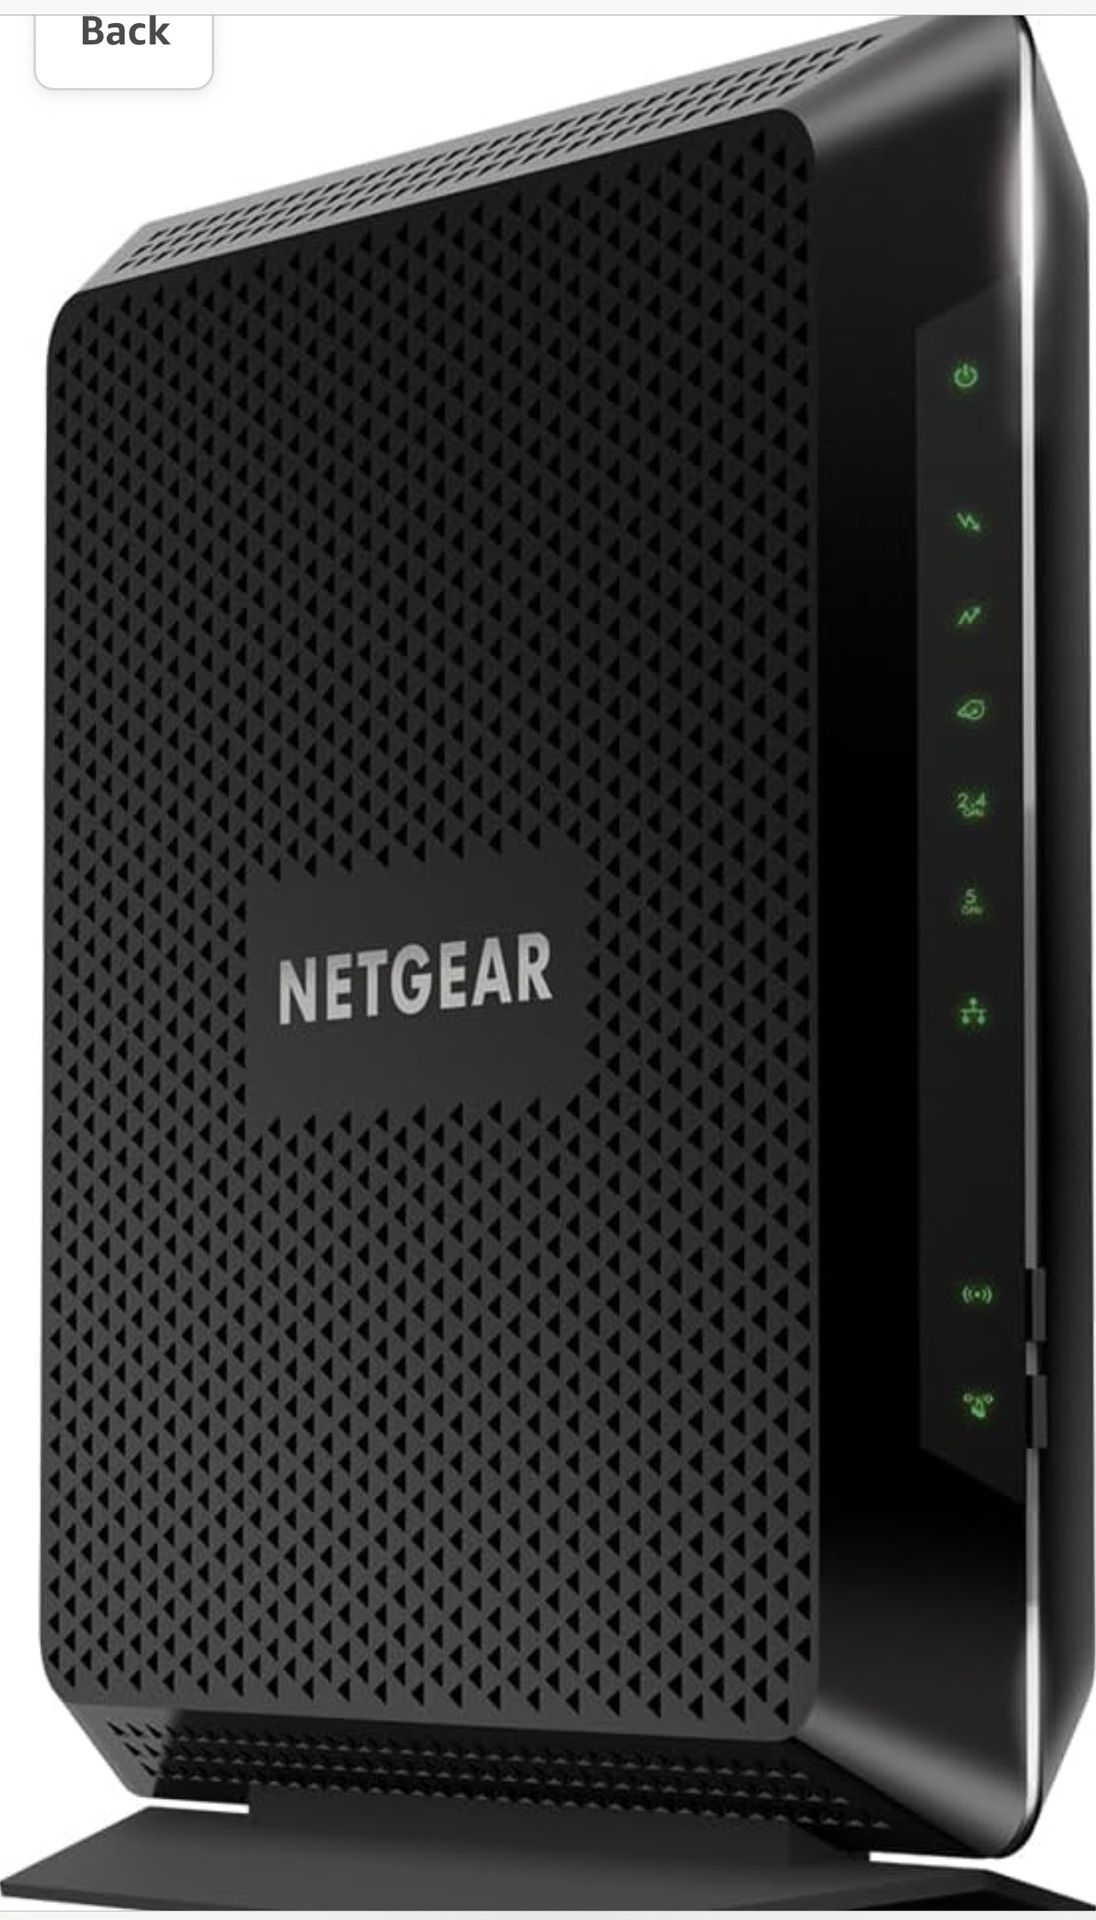 NETGEAR Nighthawk Modem Router Combo C7000-Compatible with Cable Providers Including Xfinity by Comcast, Spectrum, Cox,Plans Up to 800Mbps | AC1900 Wi